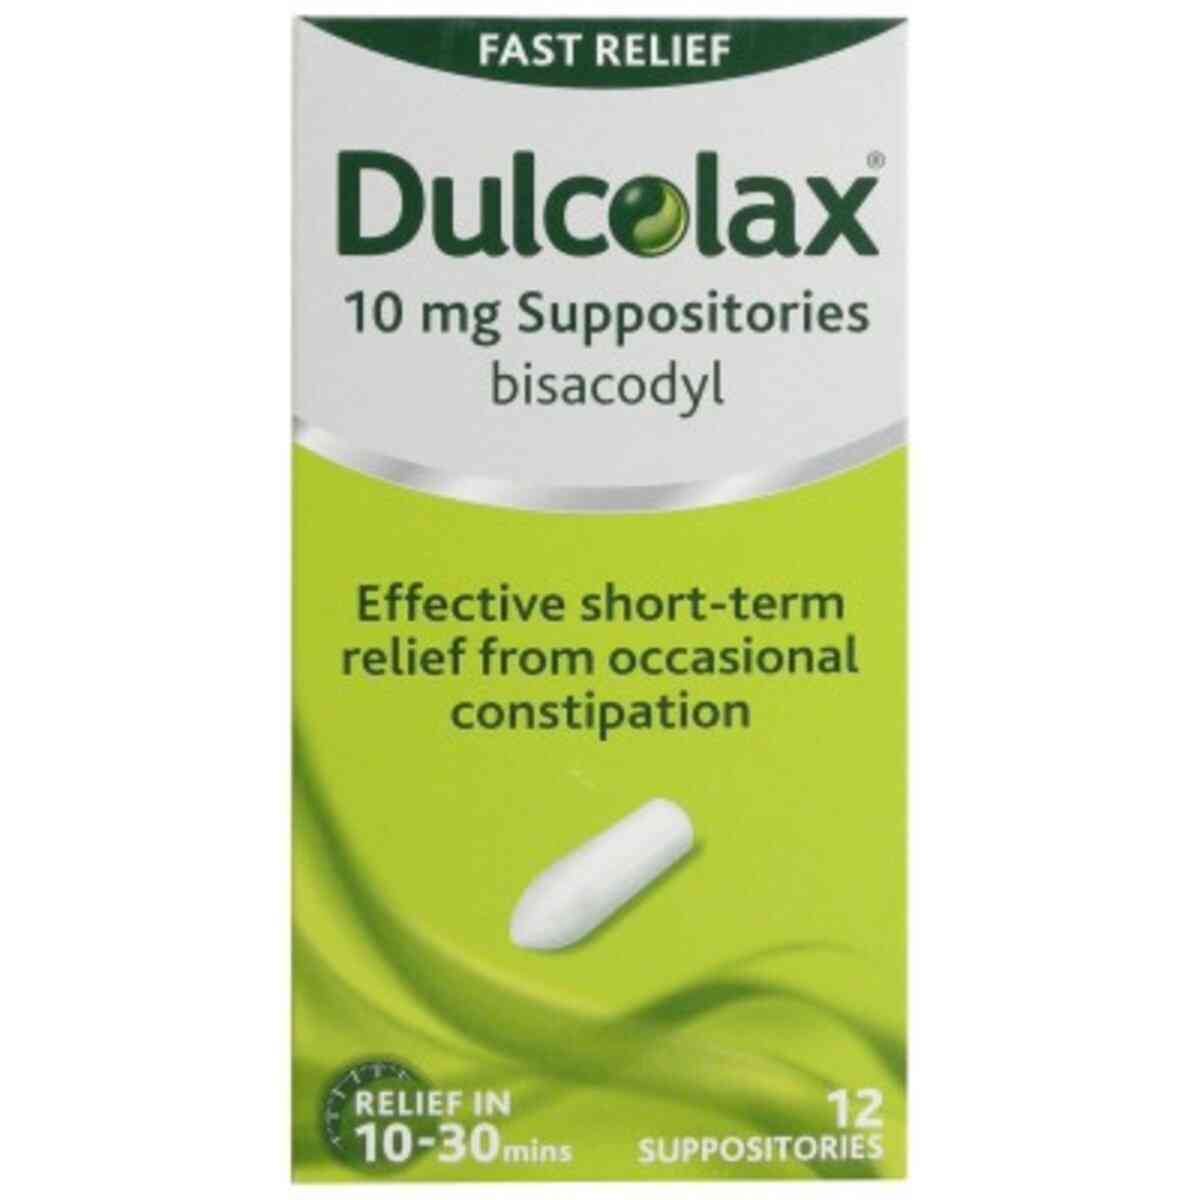 https://www.dockpharmacy.com/wp-content/uploads/2018/07/Dulcolax-10mg-Bisacodyl-laxative-Suppositories-12-Suppositories-1.jpg